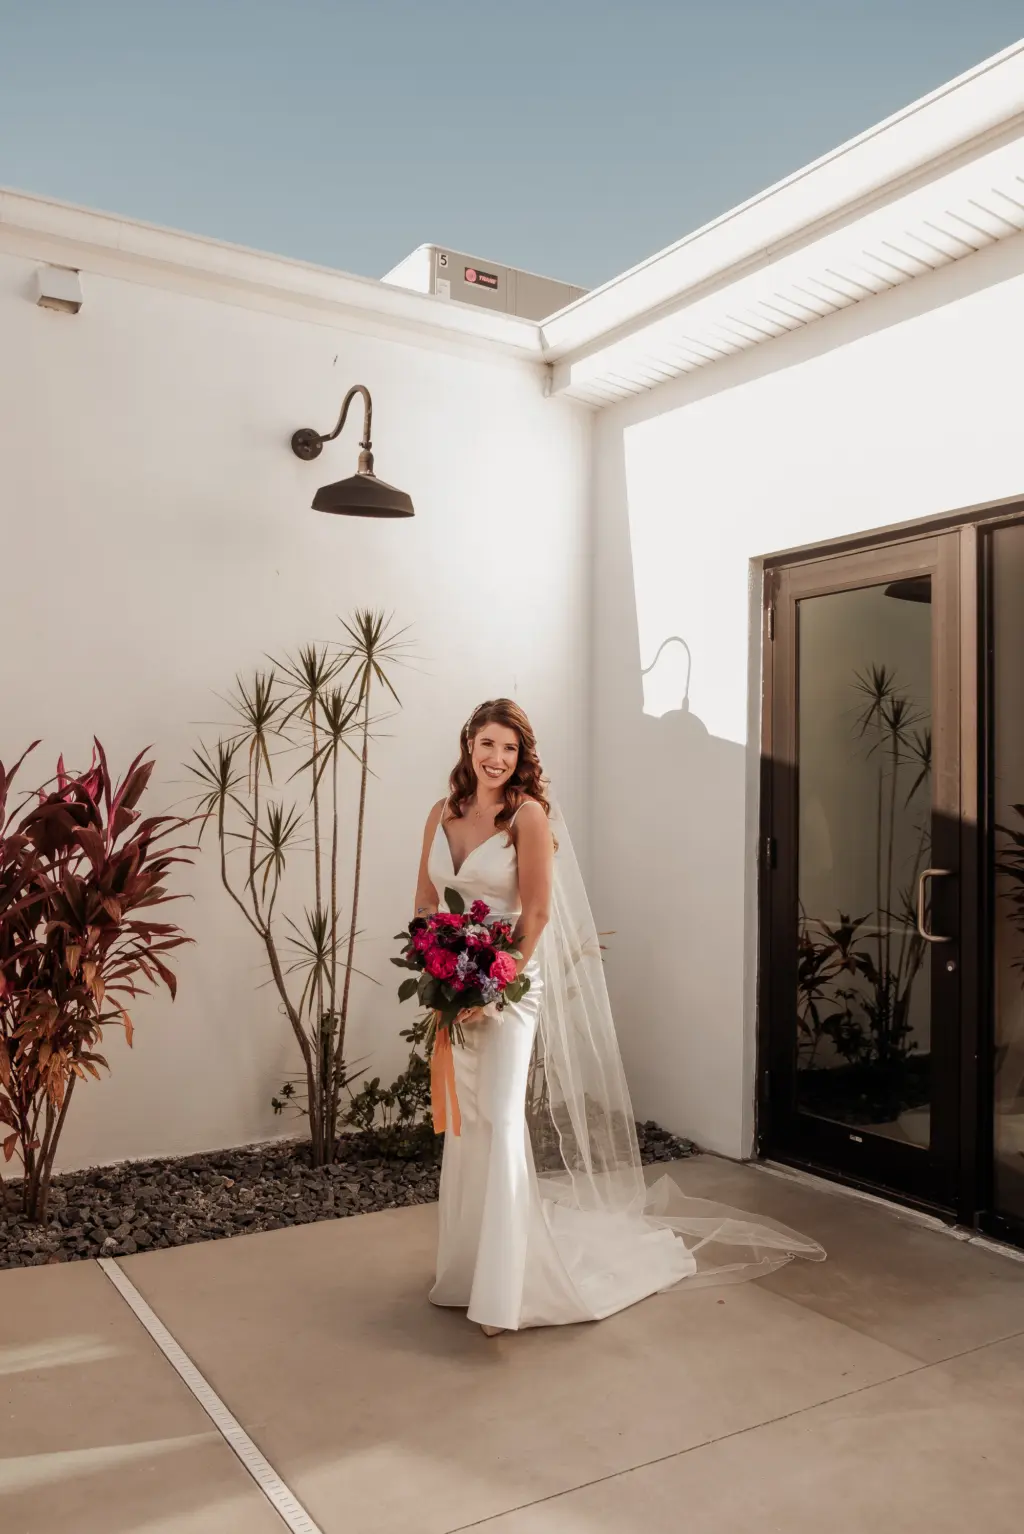 Bride in Fitted Wedding Dress and Cathedral Veil with Dark Floral Bouquet Ideas with Reds and Purples Bridal Wedding Portrait | Madeira Beach Venue The West Events